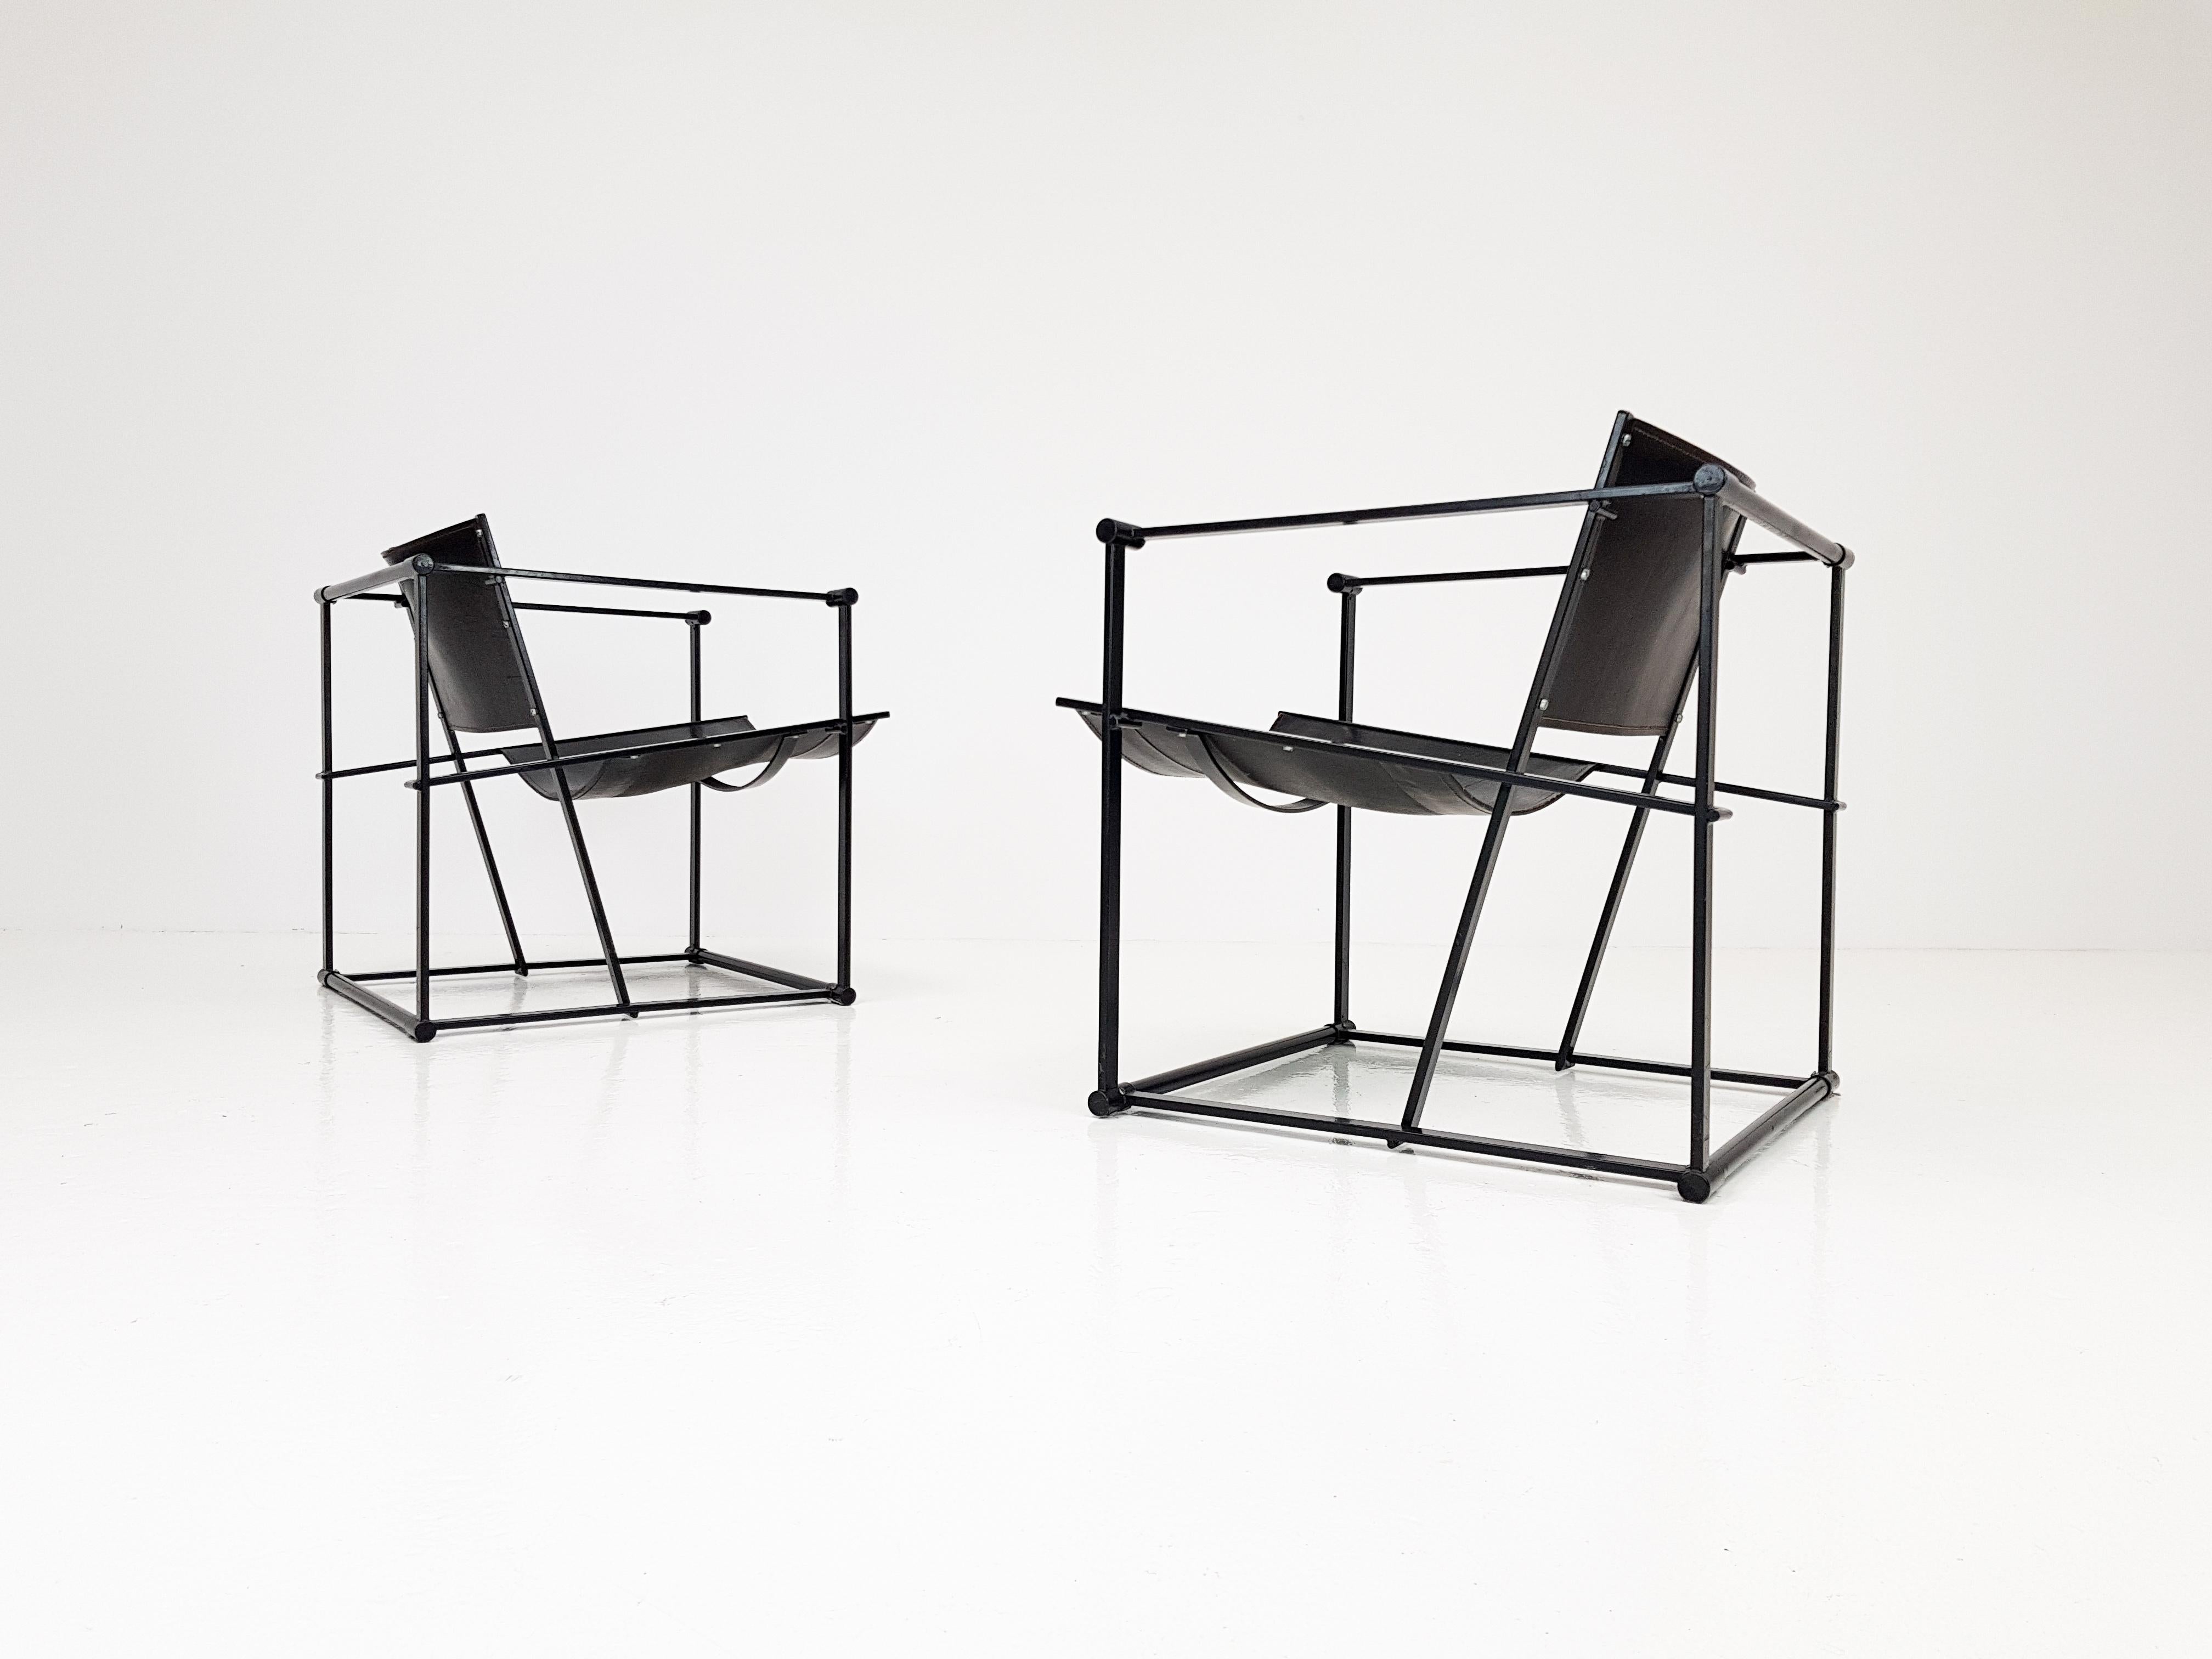 A pair of steel and leather FM62 chairs by Radboud Van Beekum for Pastoe, 1980s.

Constructed from geometrically folded steel with bent ply seating. Inspired by the designs of Gerrit Rietveld and following the traditions of the De Stijl movement the